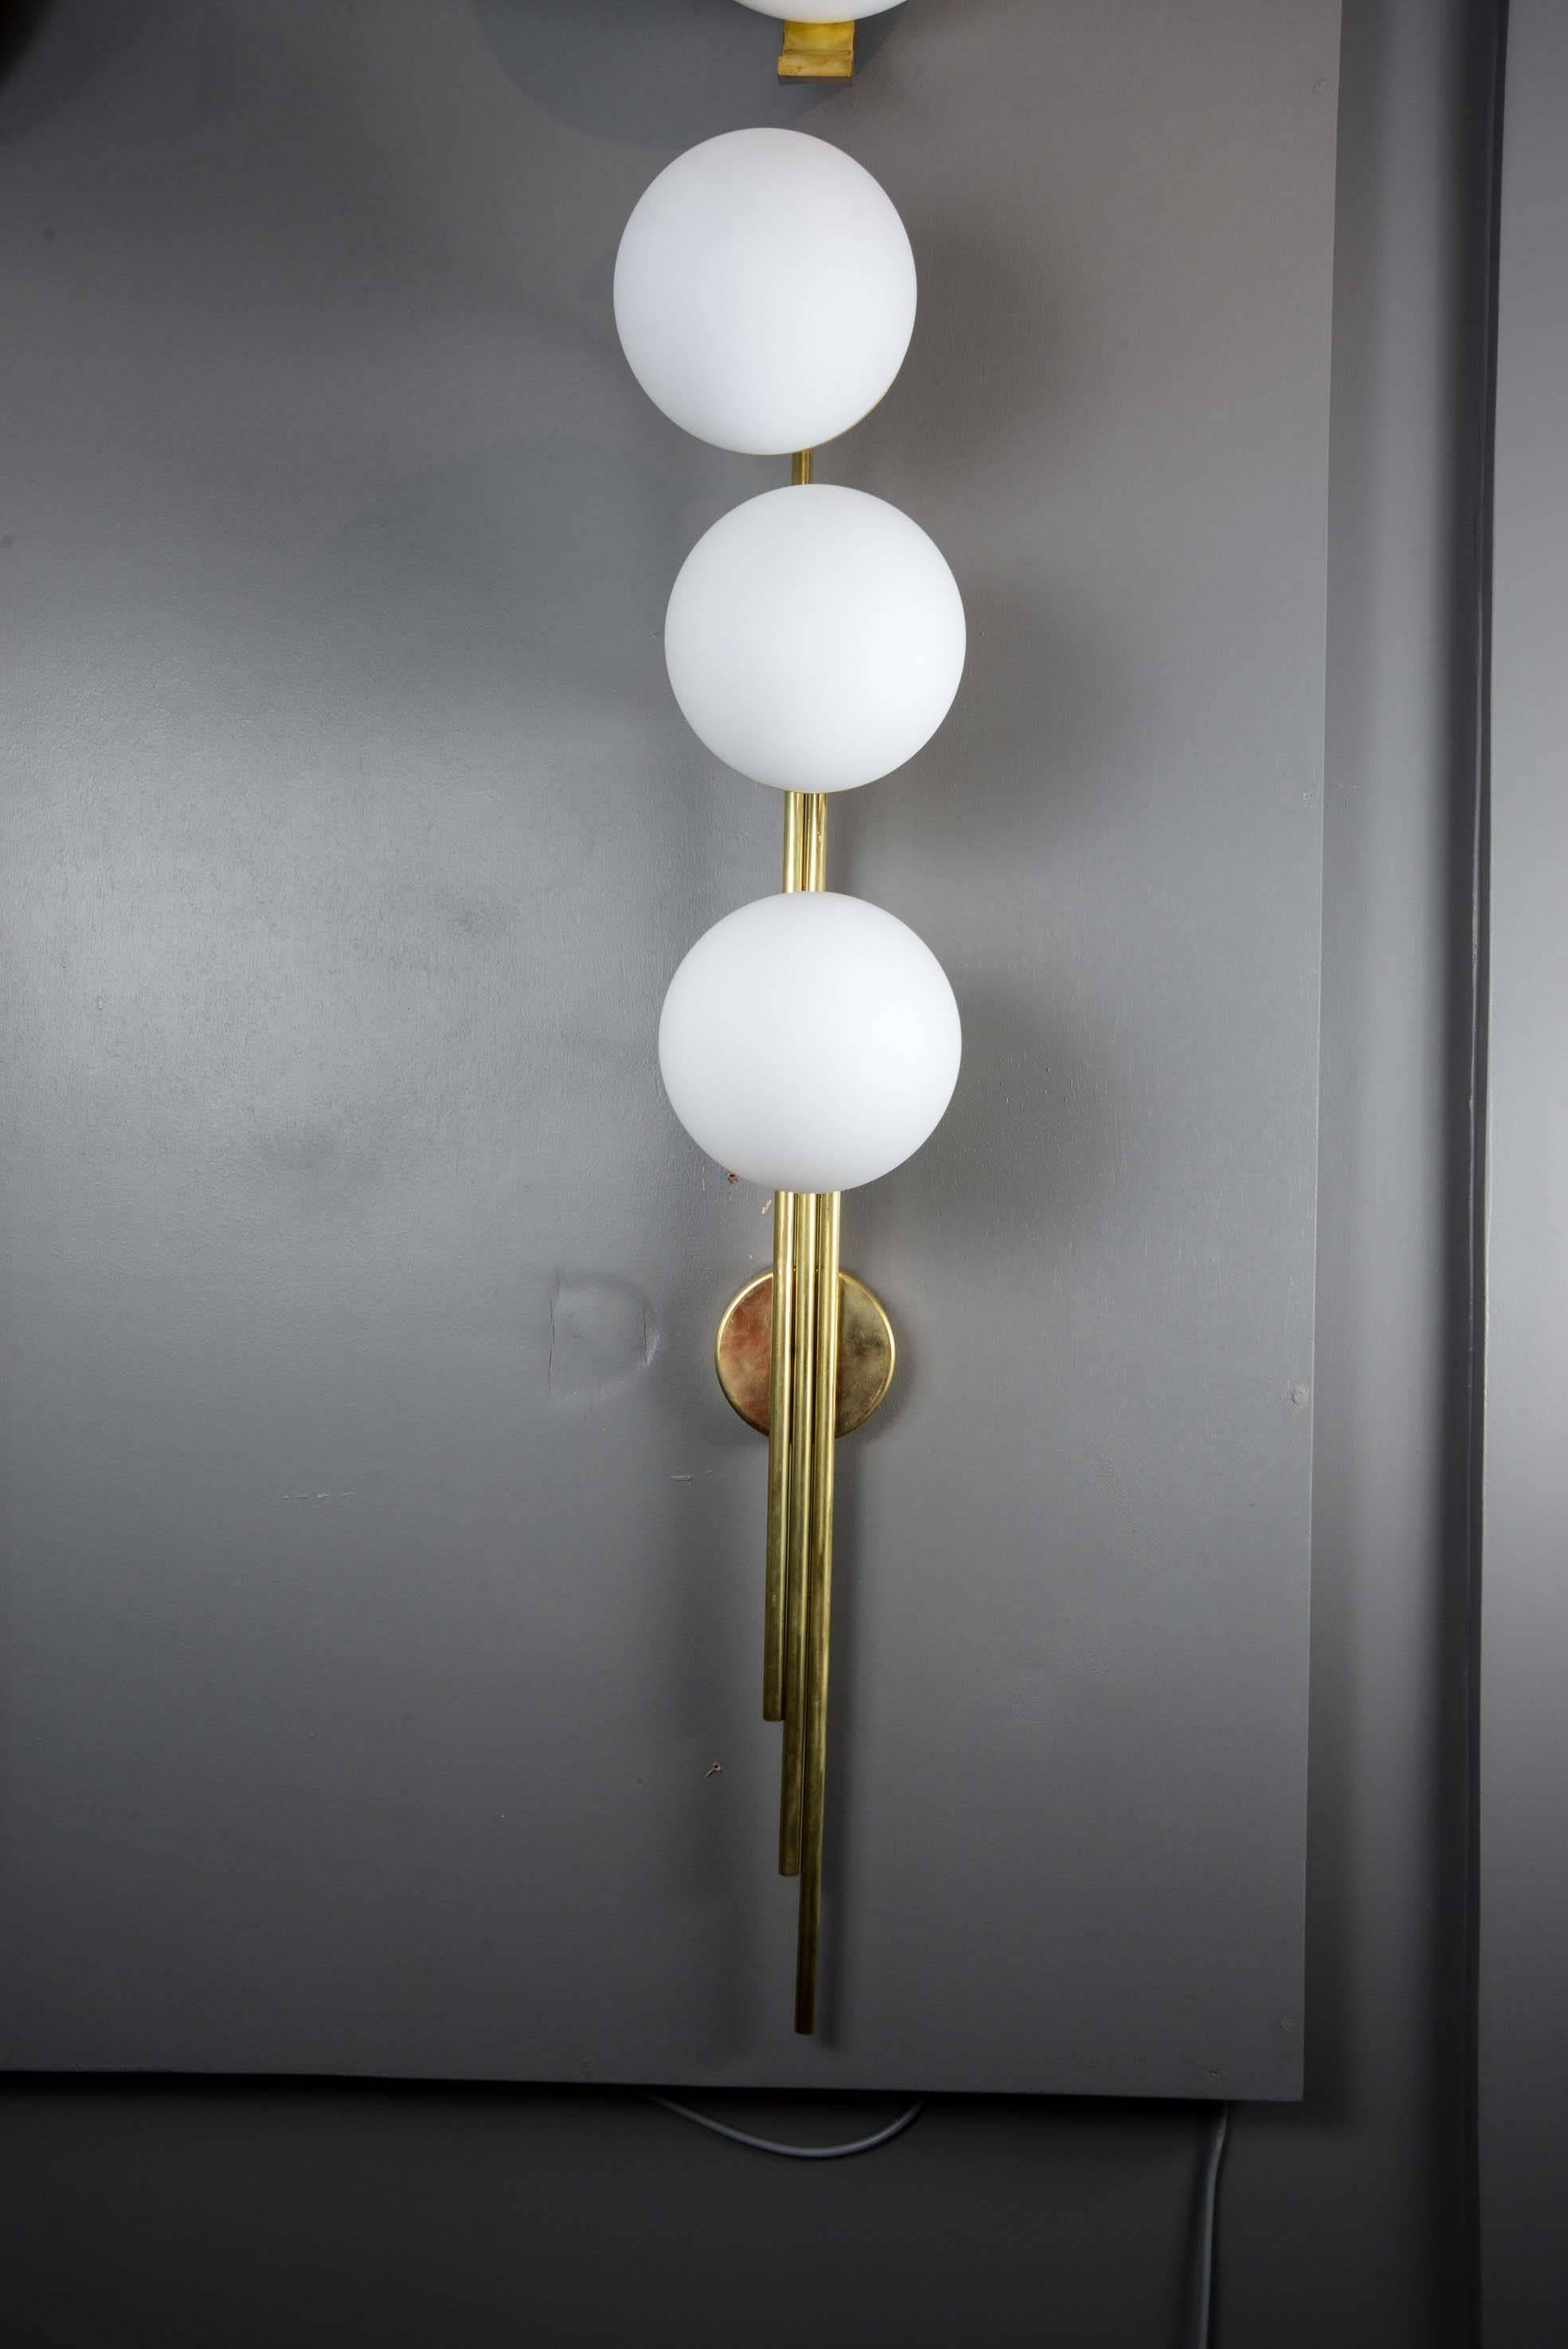 Set of six tall wall sconces made of a brass structure supporting three large white glass globes.